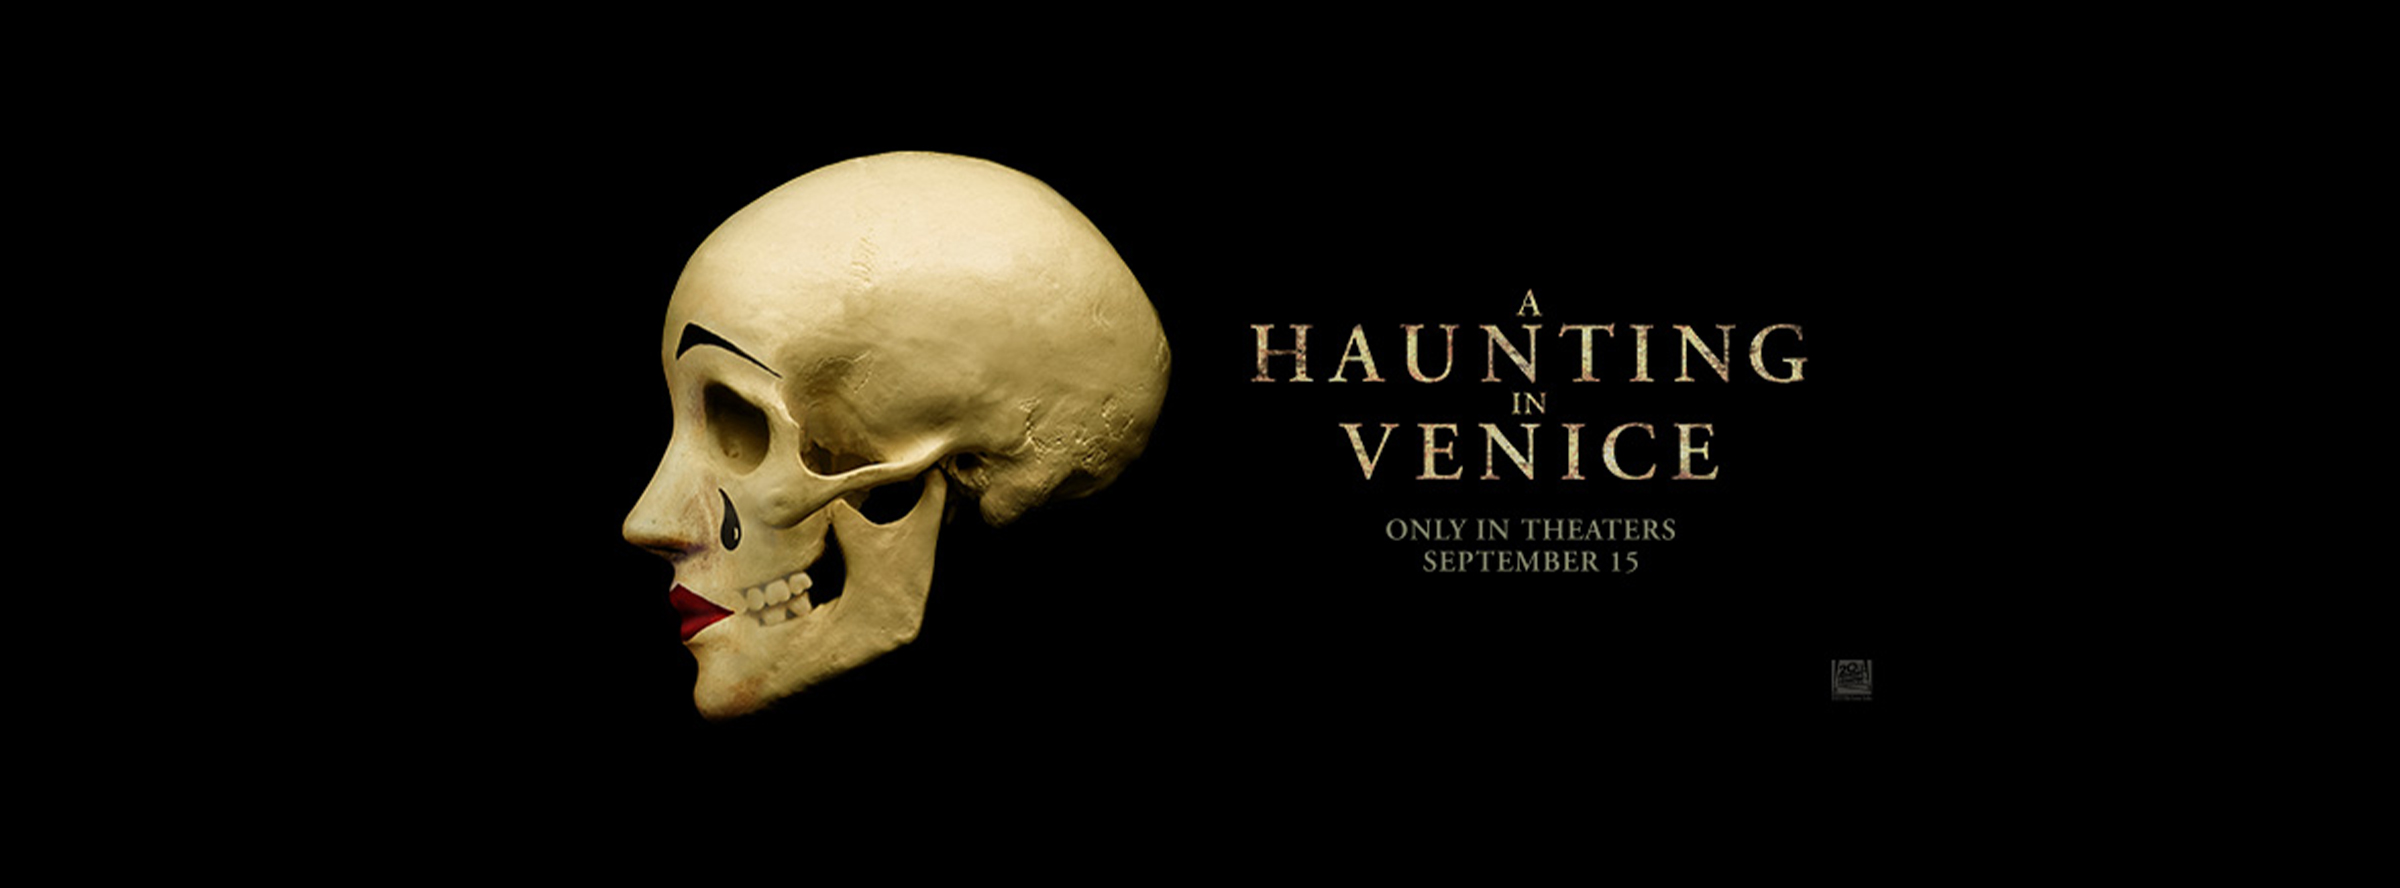 Slider Image for A Haunting in Venice